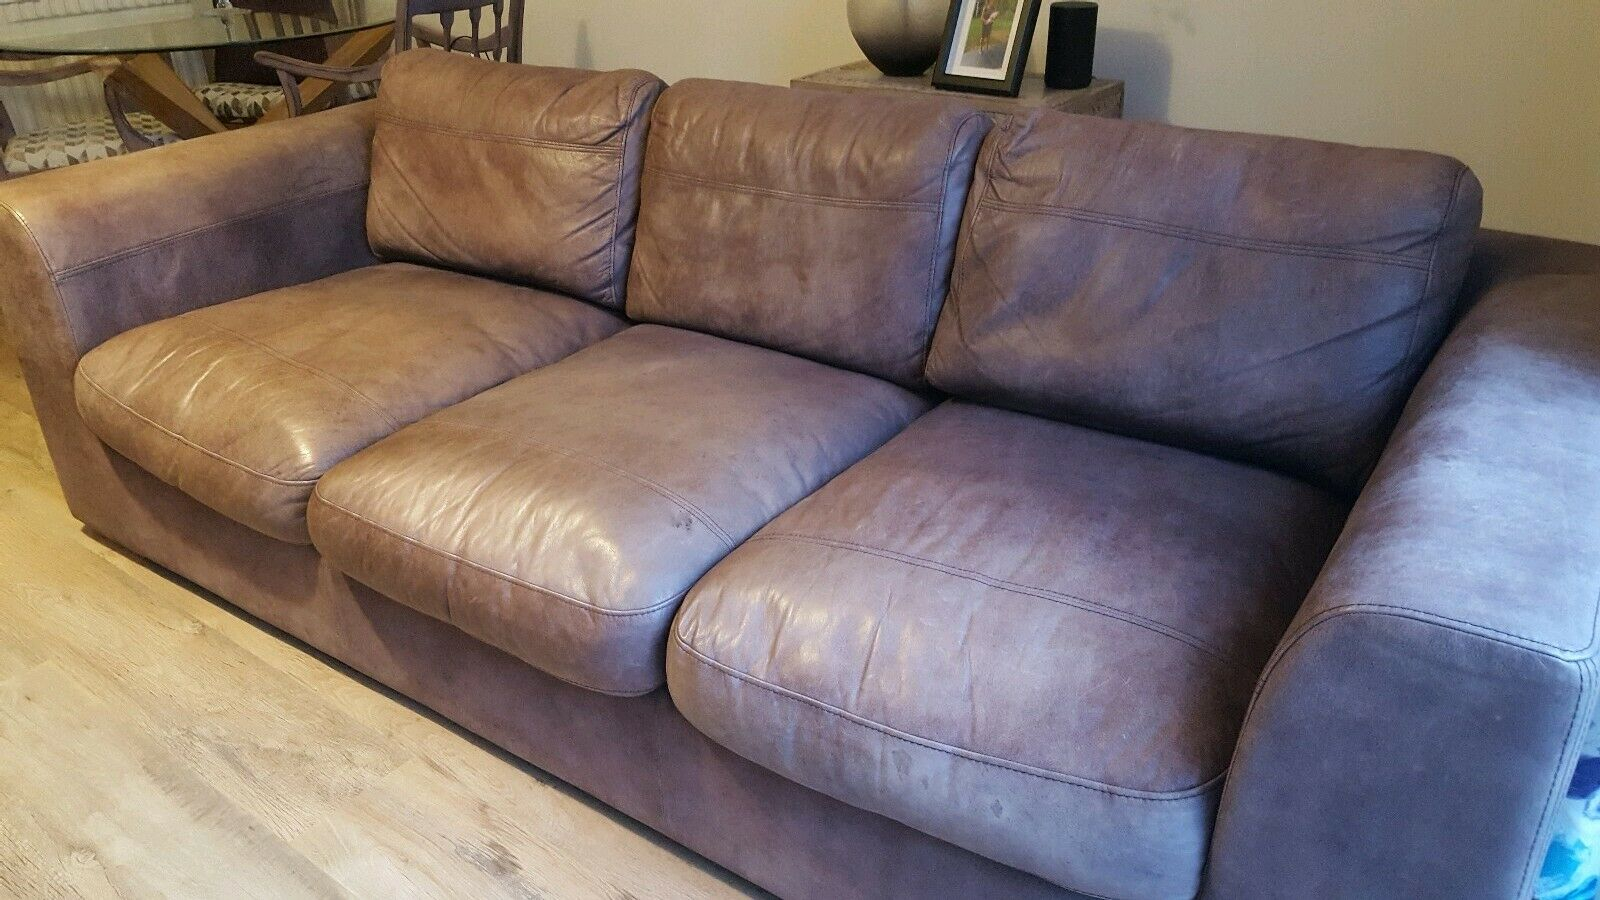 Africa Ashanti Soft Leather Large Sofa Debenhams In Very Good Condition throughout size 1600 X 900